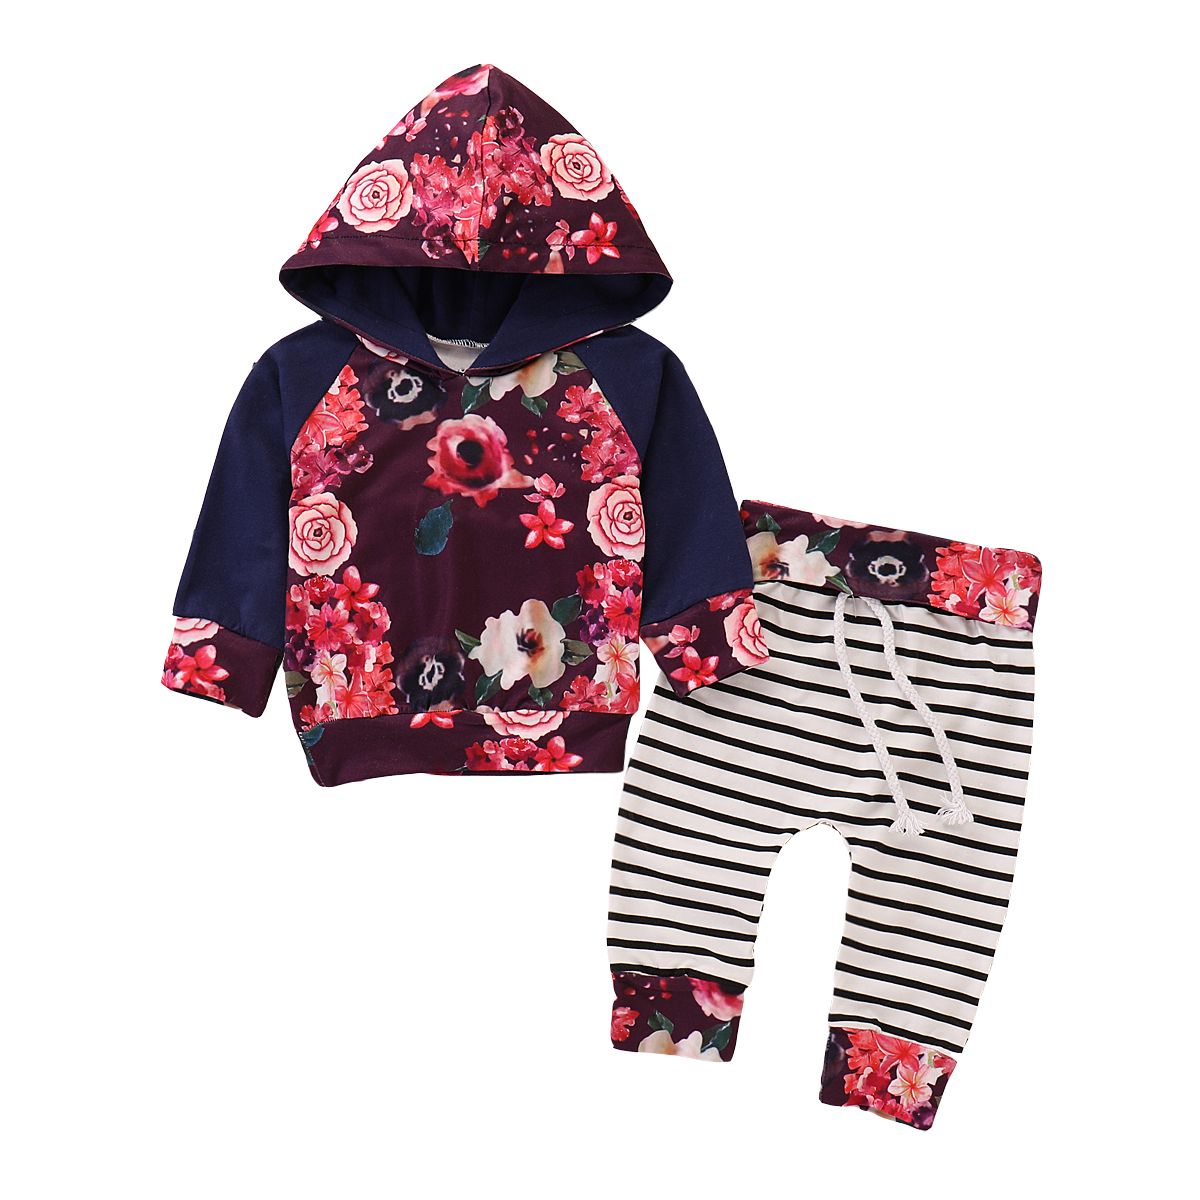 Baby Girl 2pcs Set Outfit Flower Print Hoodies with Pocket Top+Striped Long Pants